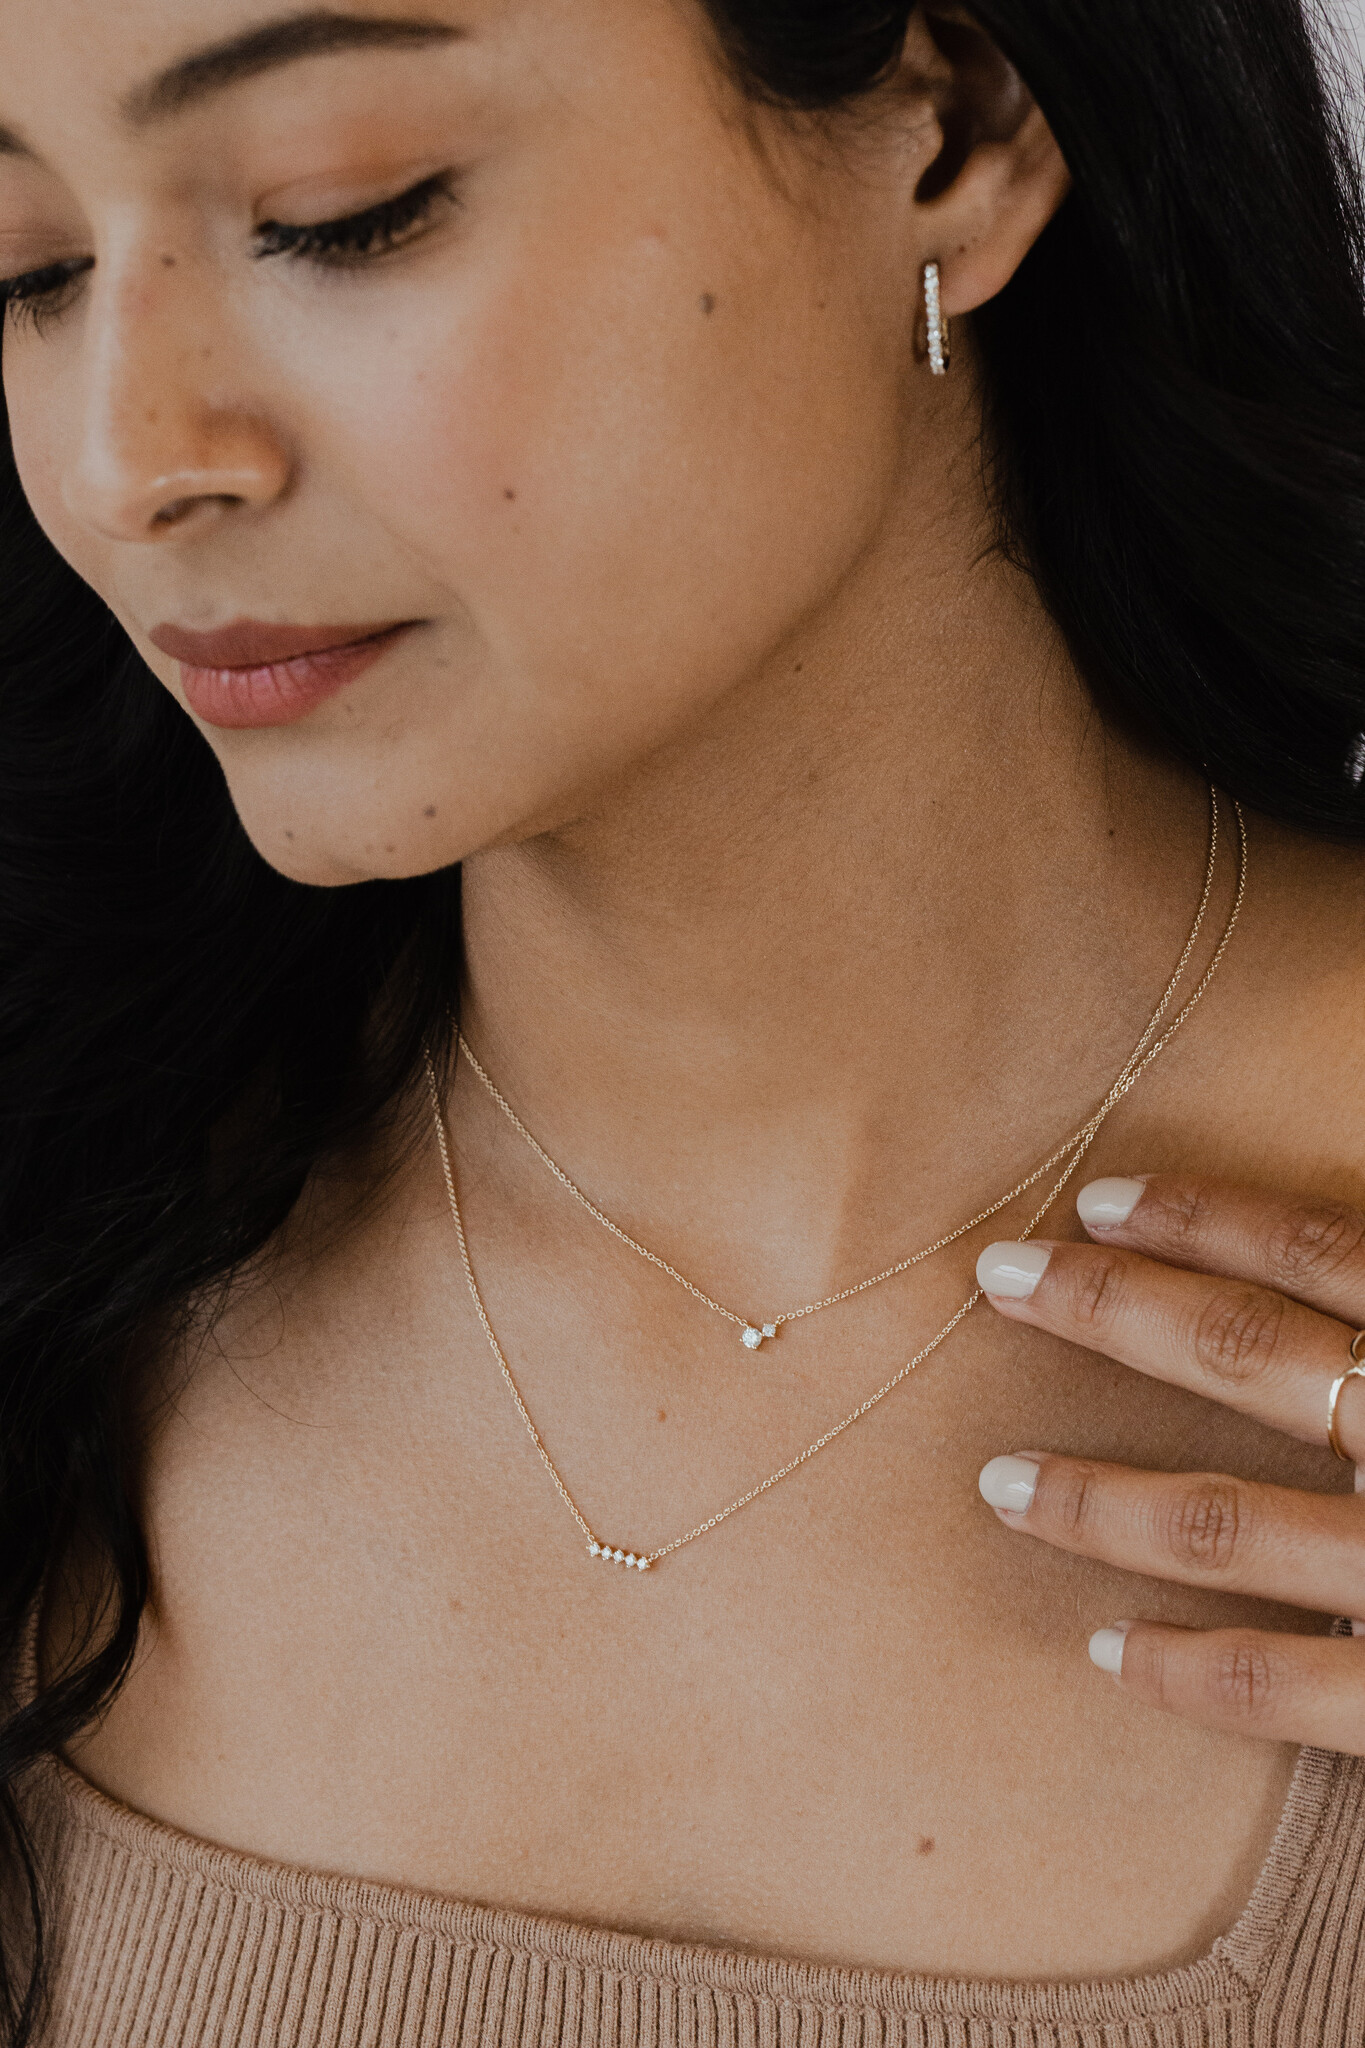 Current Jewelry Trend: Don't Call It a Tennis Necklace | National Jeweler